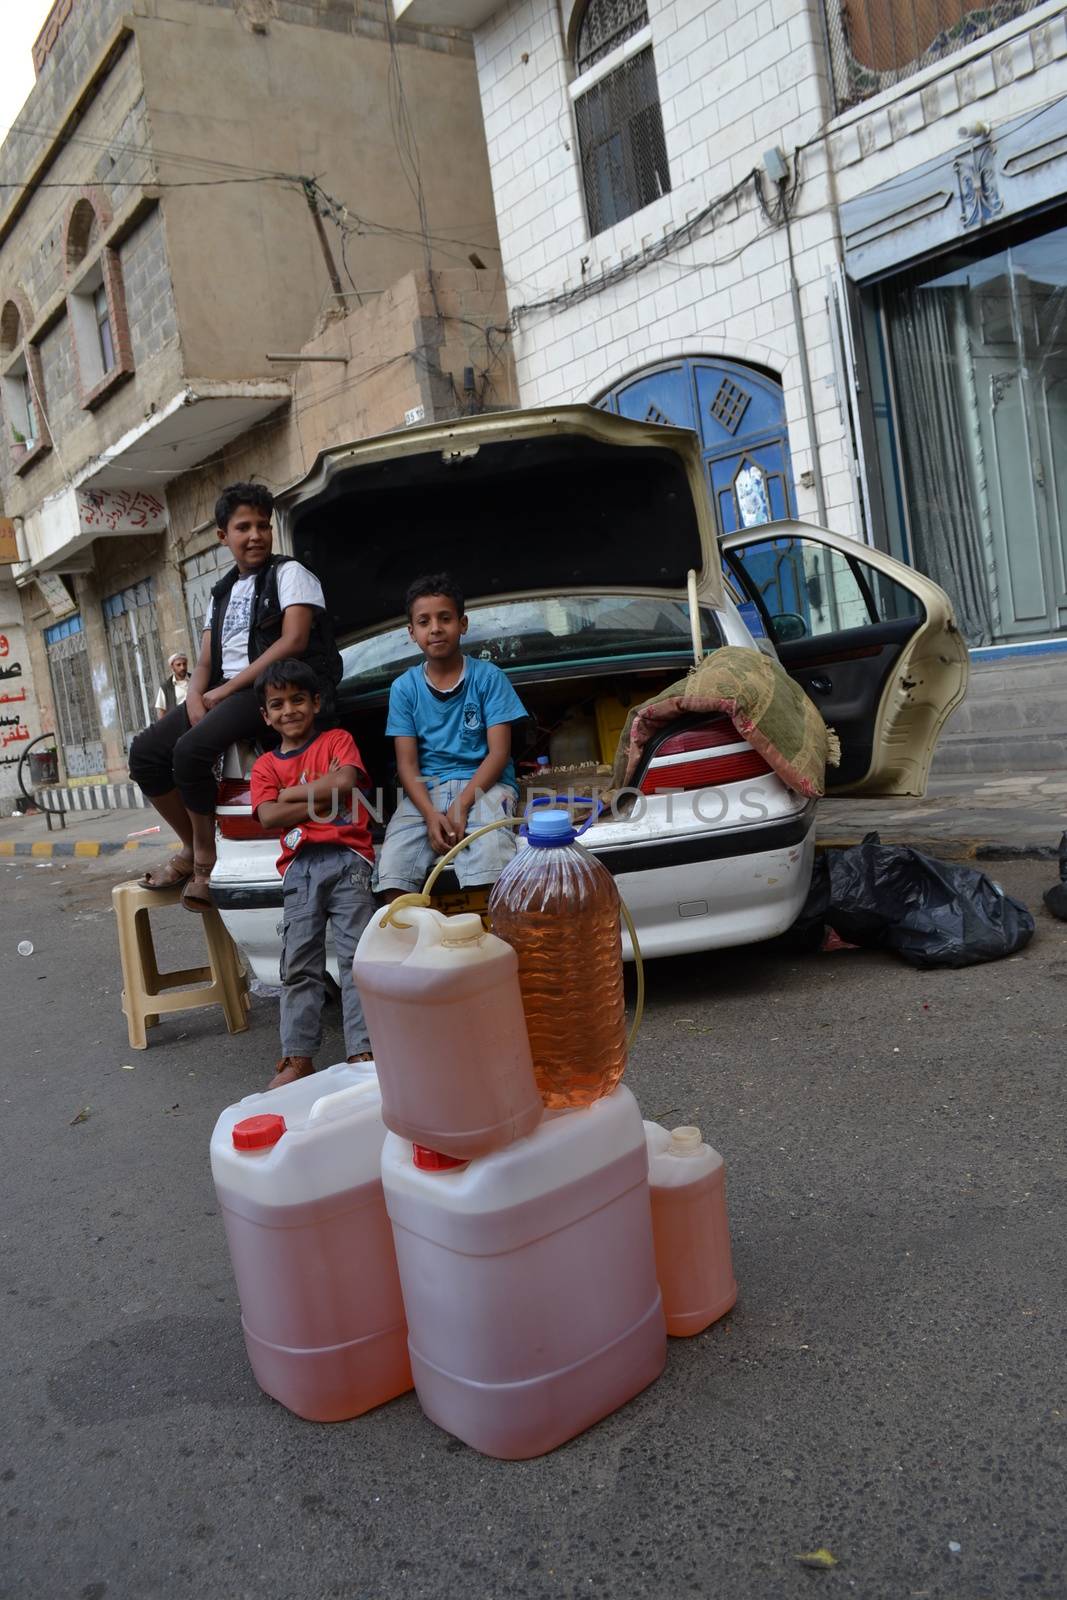 YEMEN, Sanaa: Children pose with black market bottles of petrol in Sanaa, Yemen's capital, on November 7, 2015, as petrol stations have closed since the beginning of the war and Saudi bombings over the country.